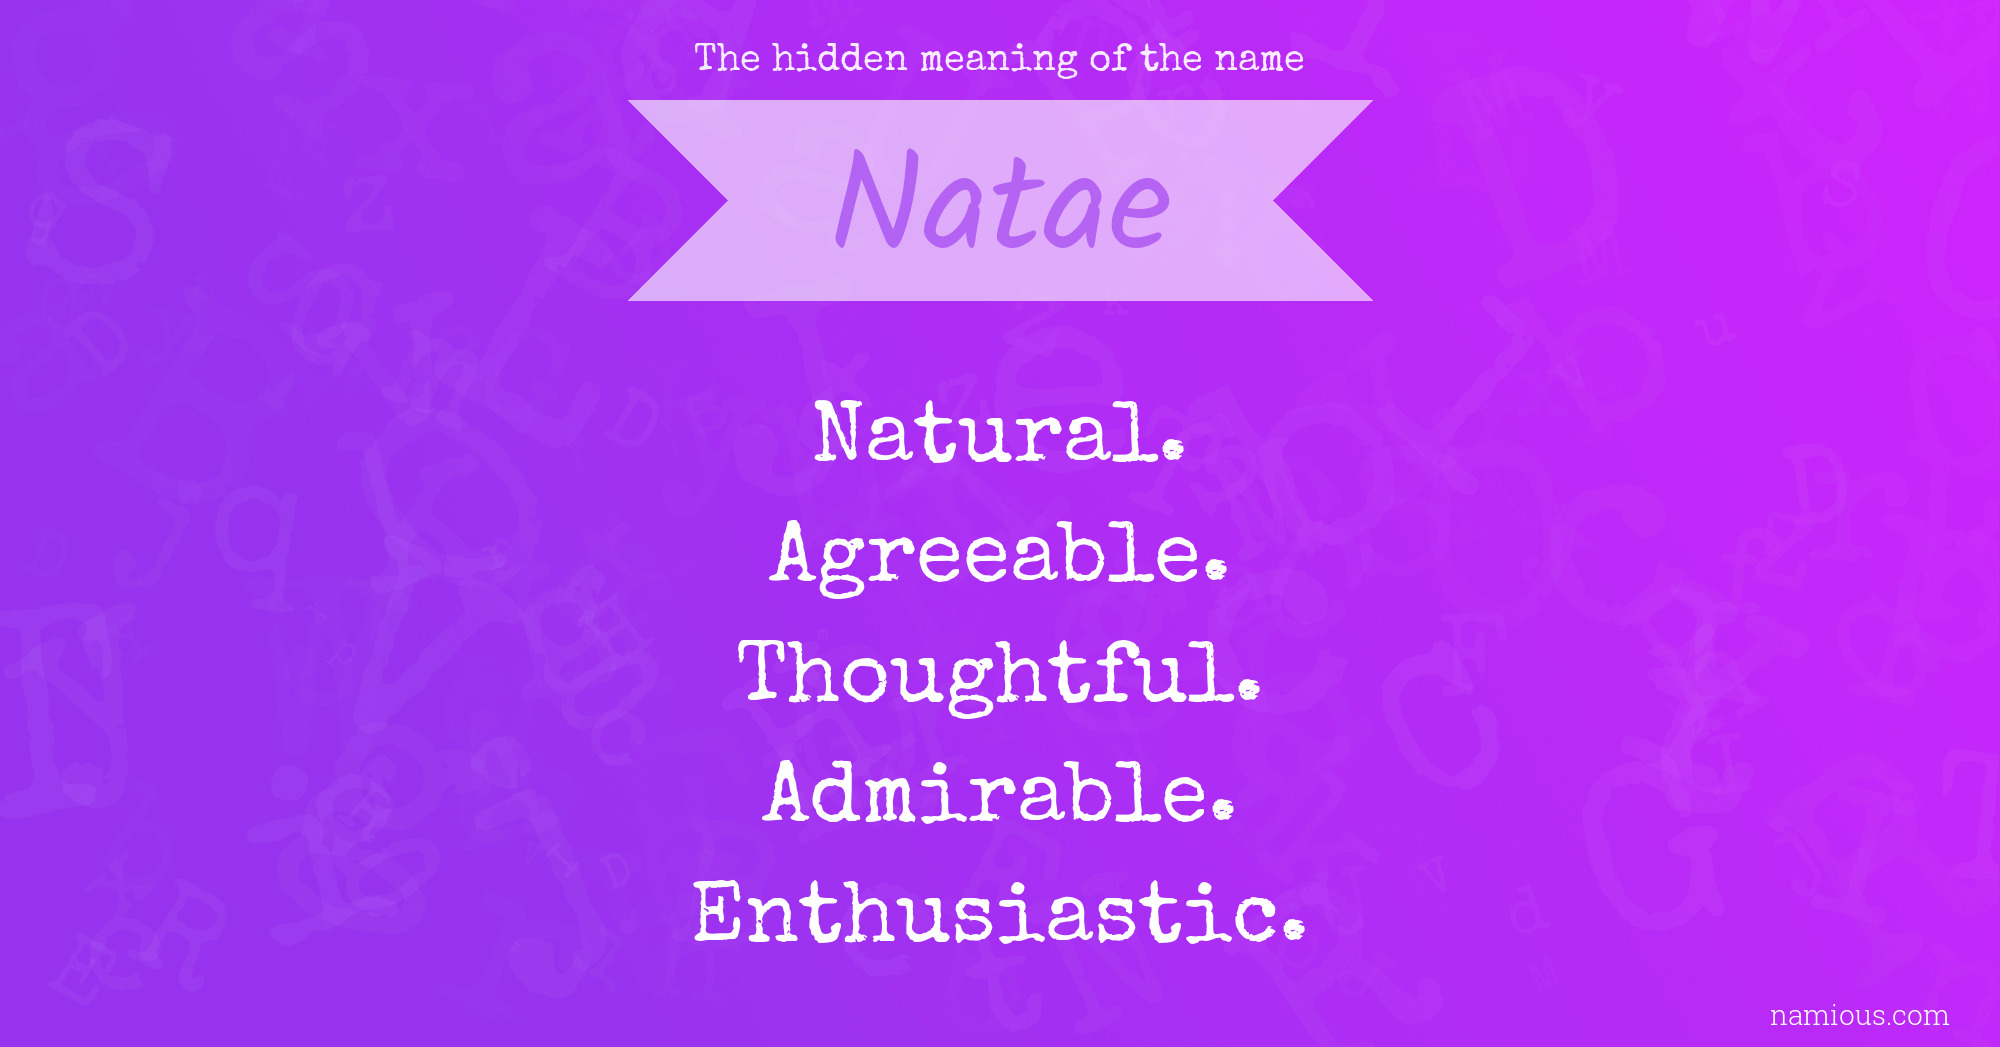 The hidden meaning of the name Natae